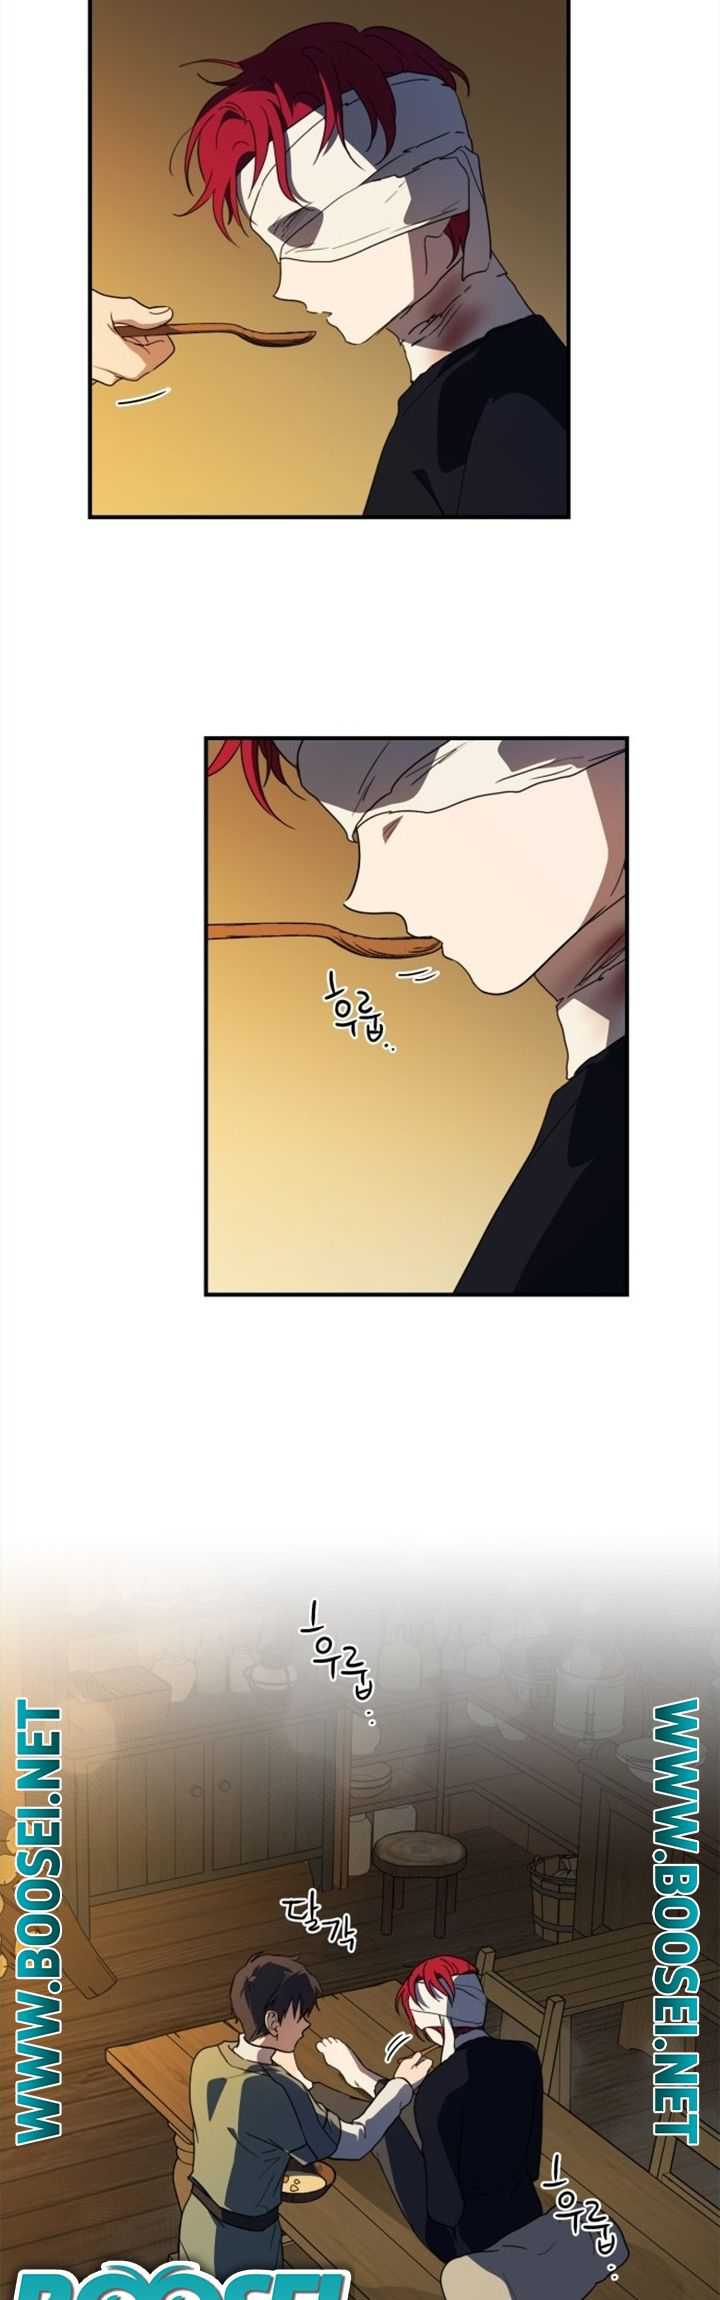 Blinded by the Setting Sun Chapter 107